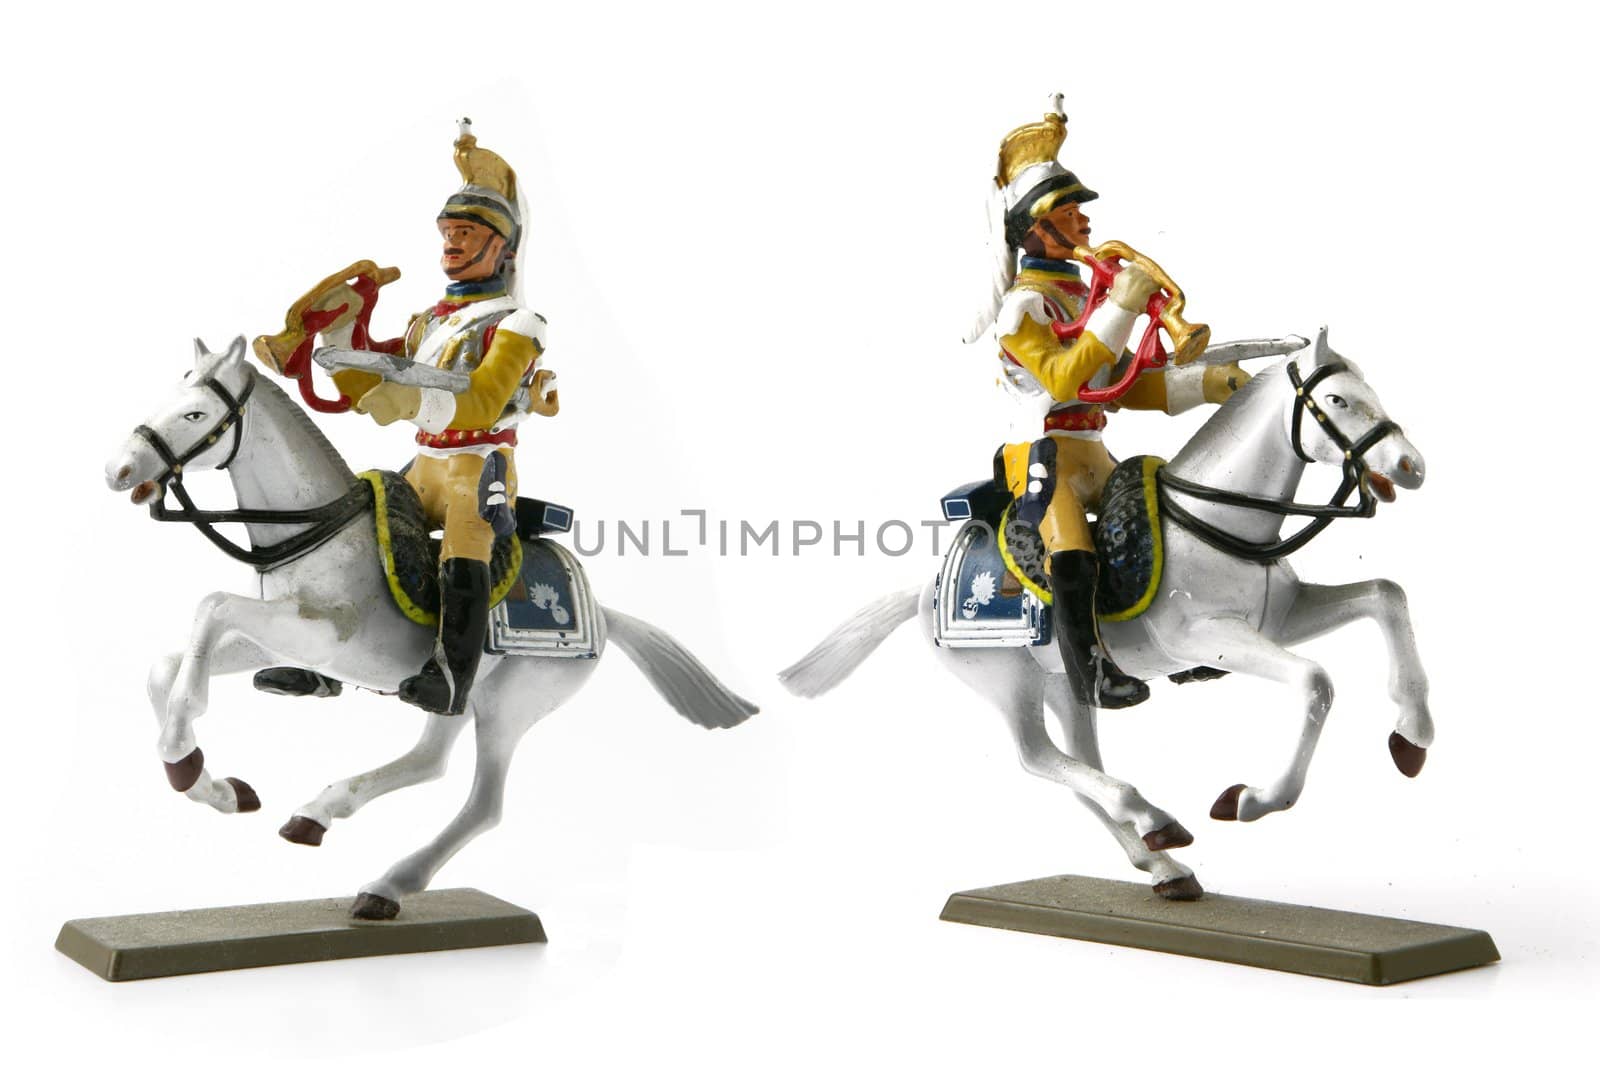 Two cavalier figurines by phovoir